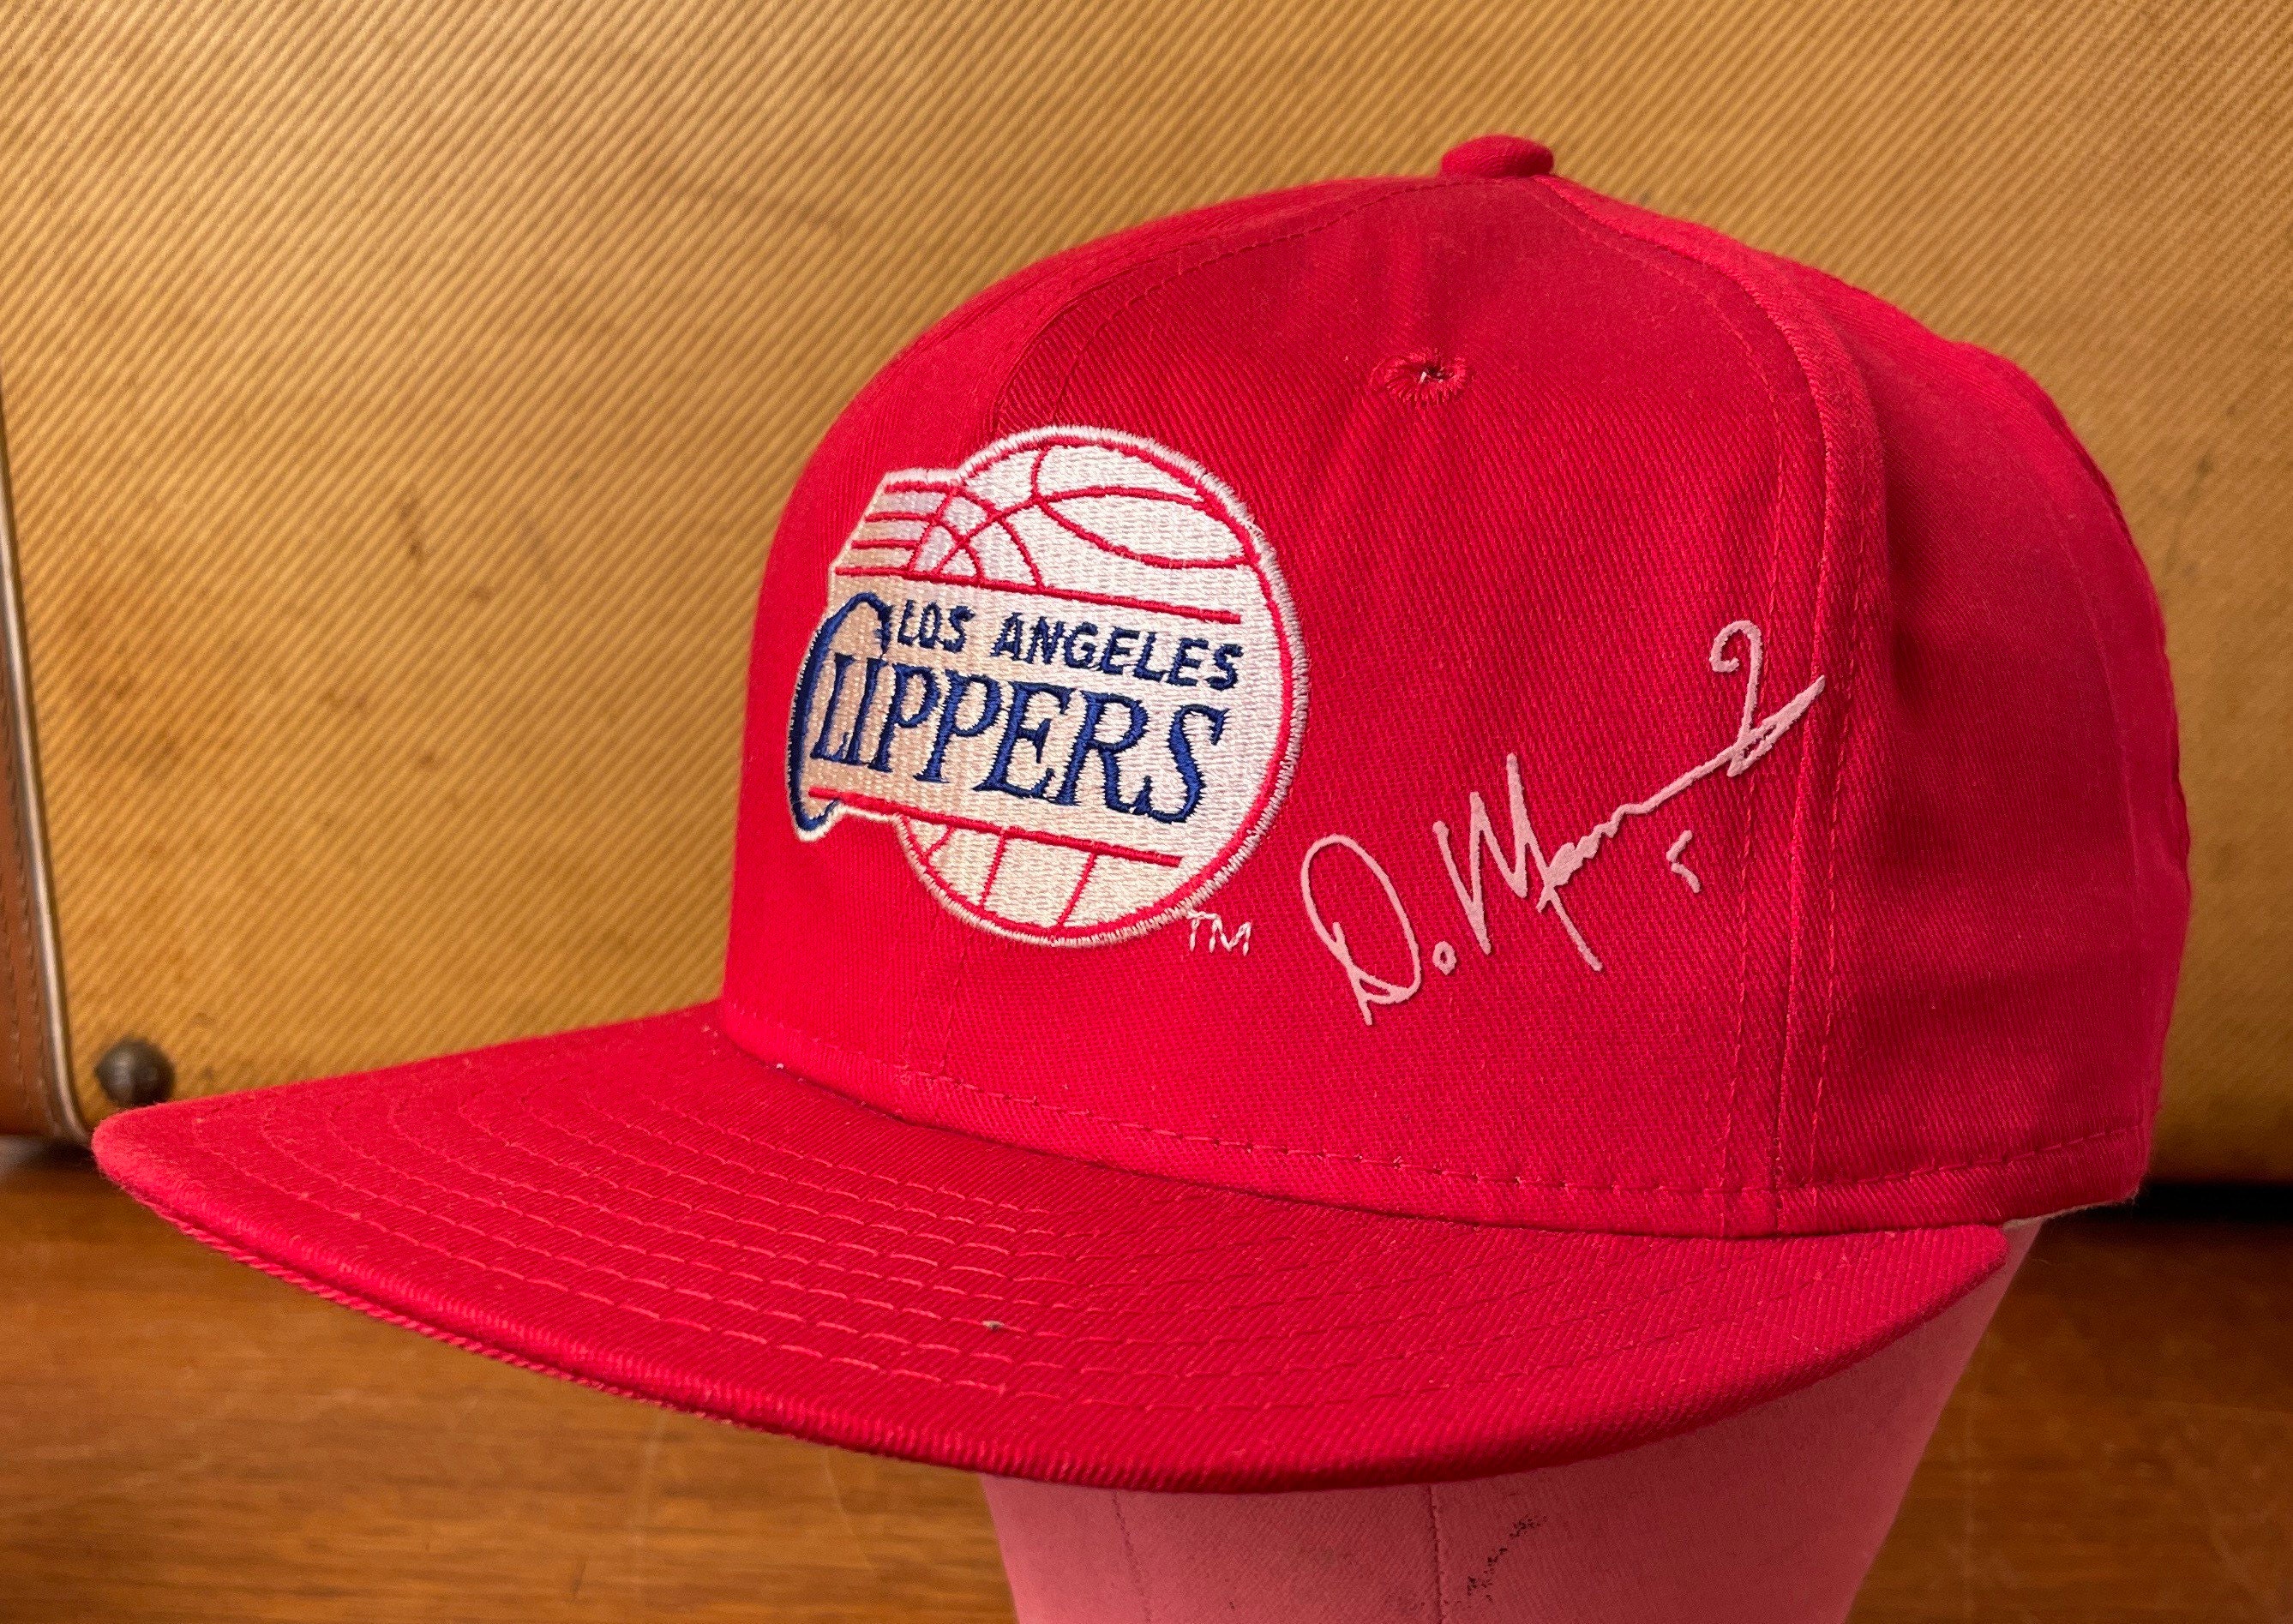 Elton Brand #42 Los Angeles Clippers Mitchell & Ness NBA